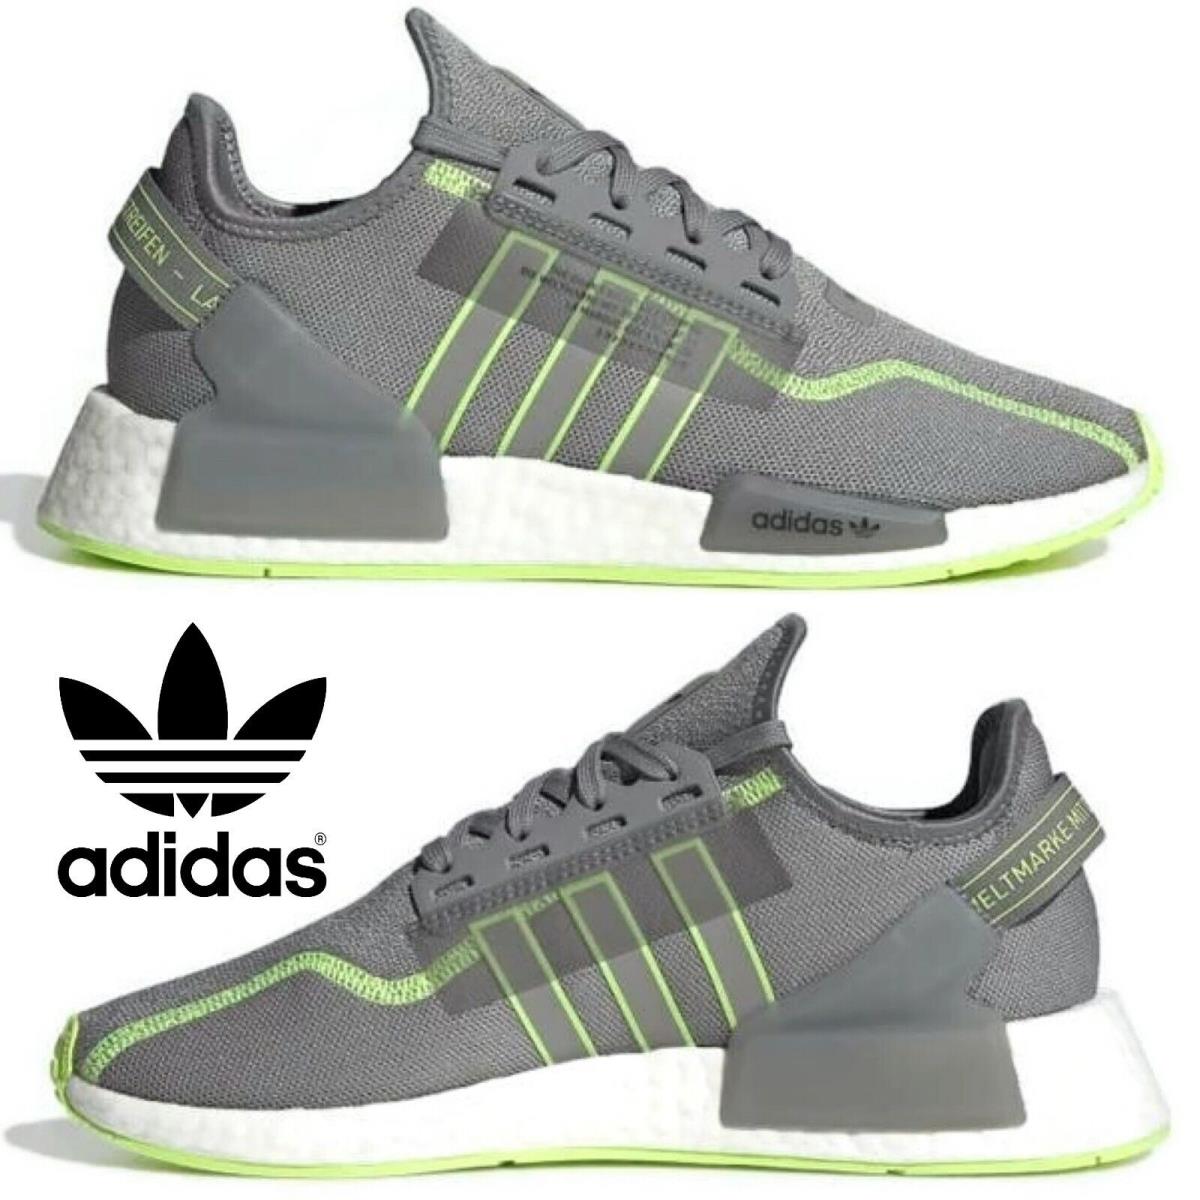 Adidas Originals Nmd R1 V2 Men`s Sneakers Running Shoes Gym Casual Sport Gray